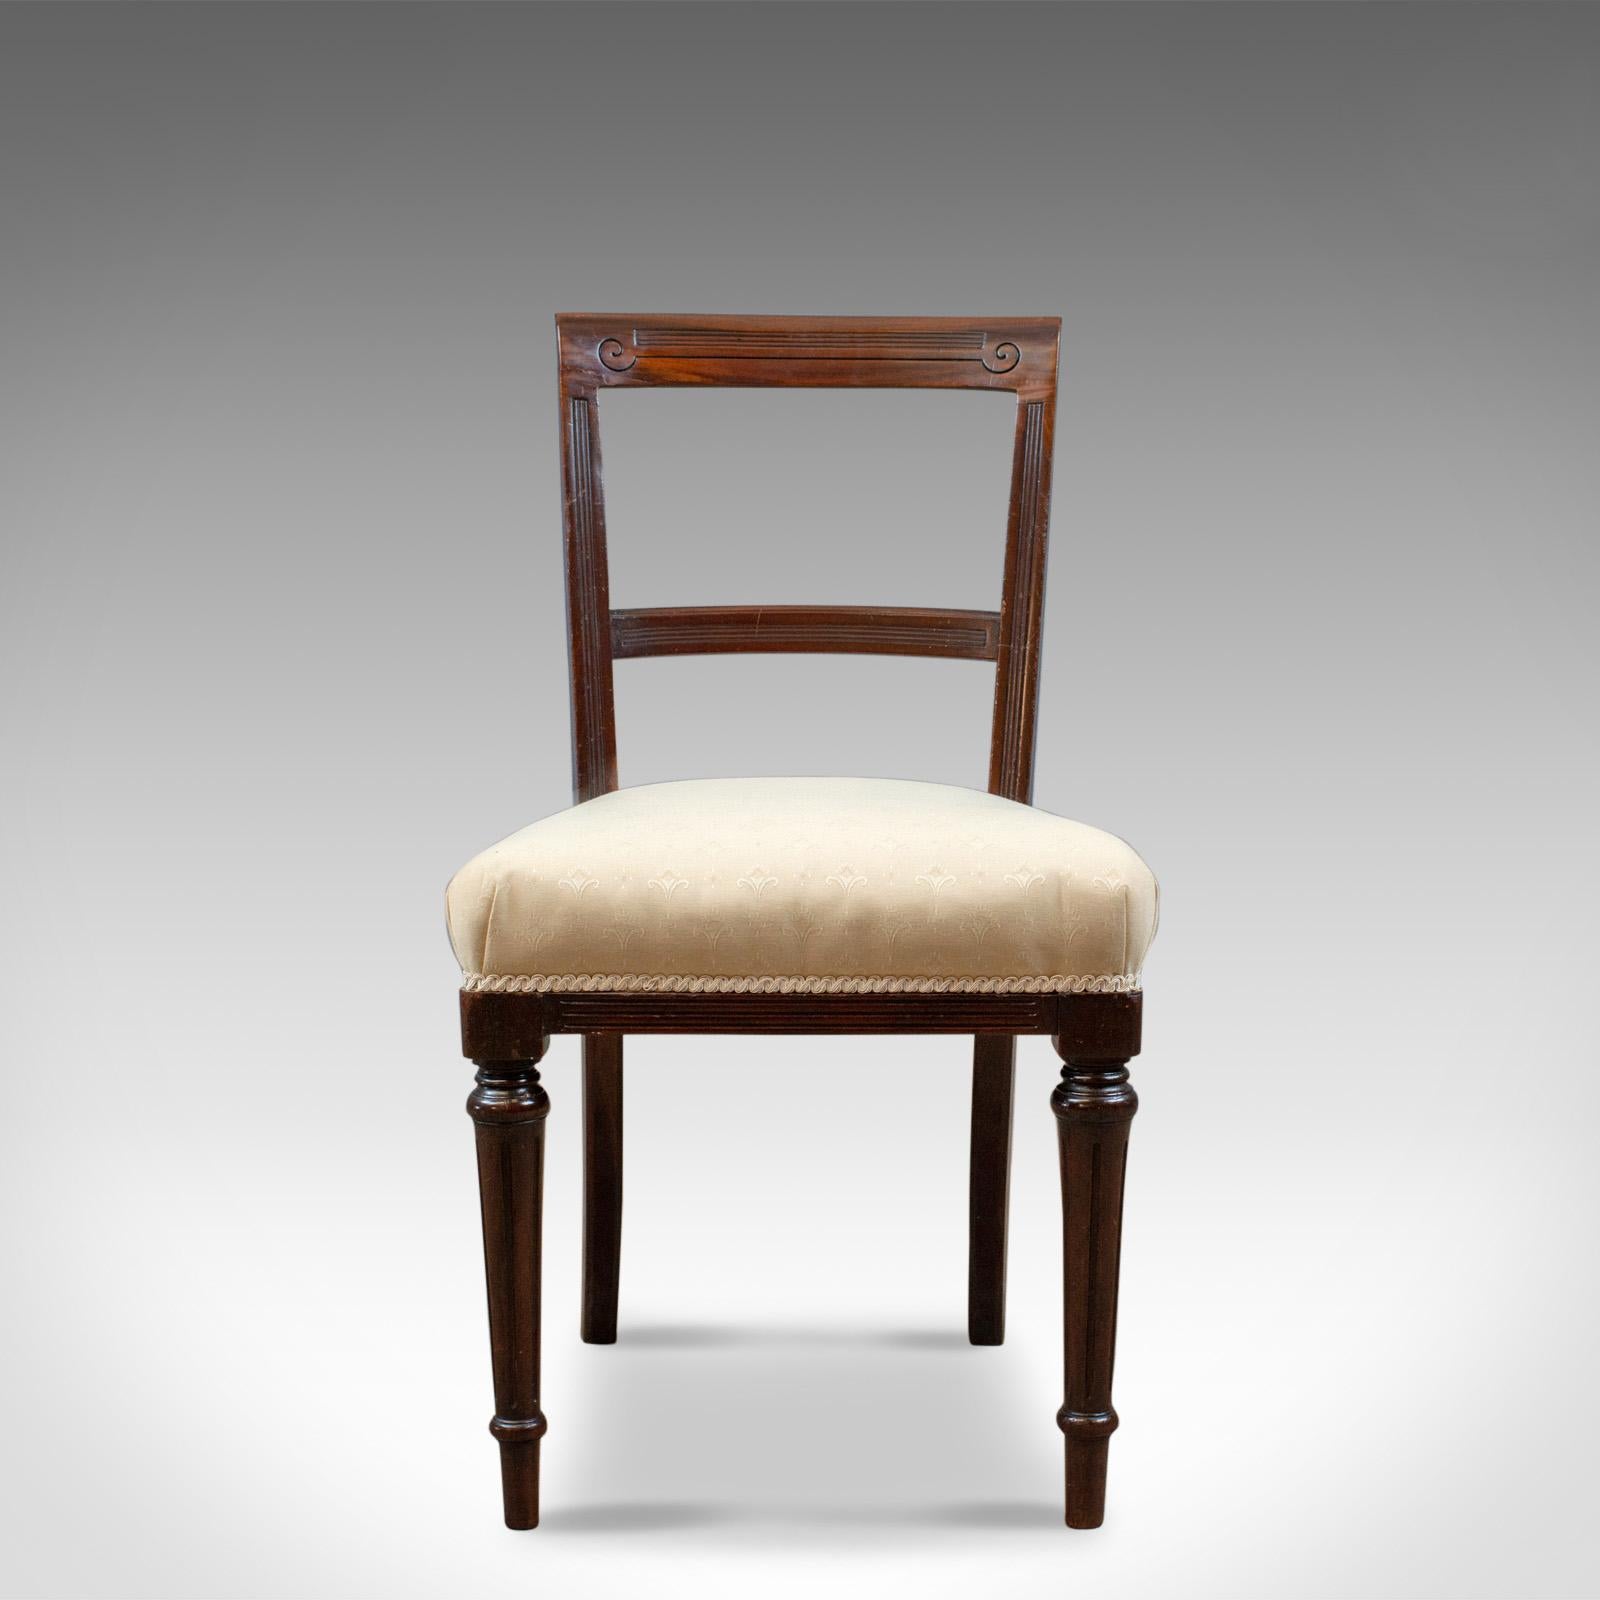 This is a set of six antique dining chairs. English, Victorian mahogany chairs dating to the early 19th century, circa 1840 and later retailed by Shoolbred, London.

A superior set of chairs in select mahogany with a desirable patina
Good color